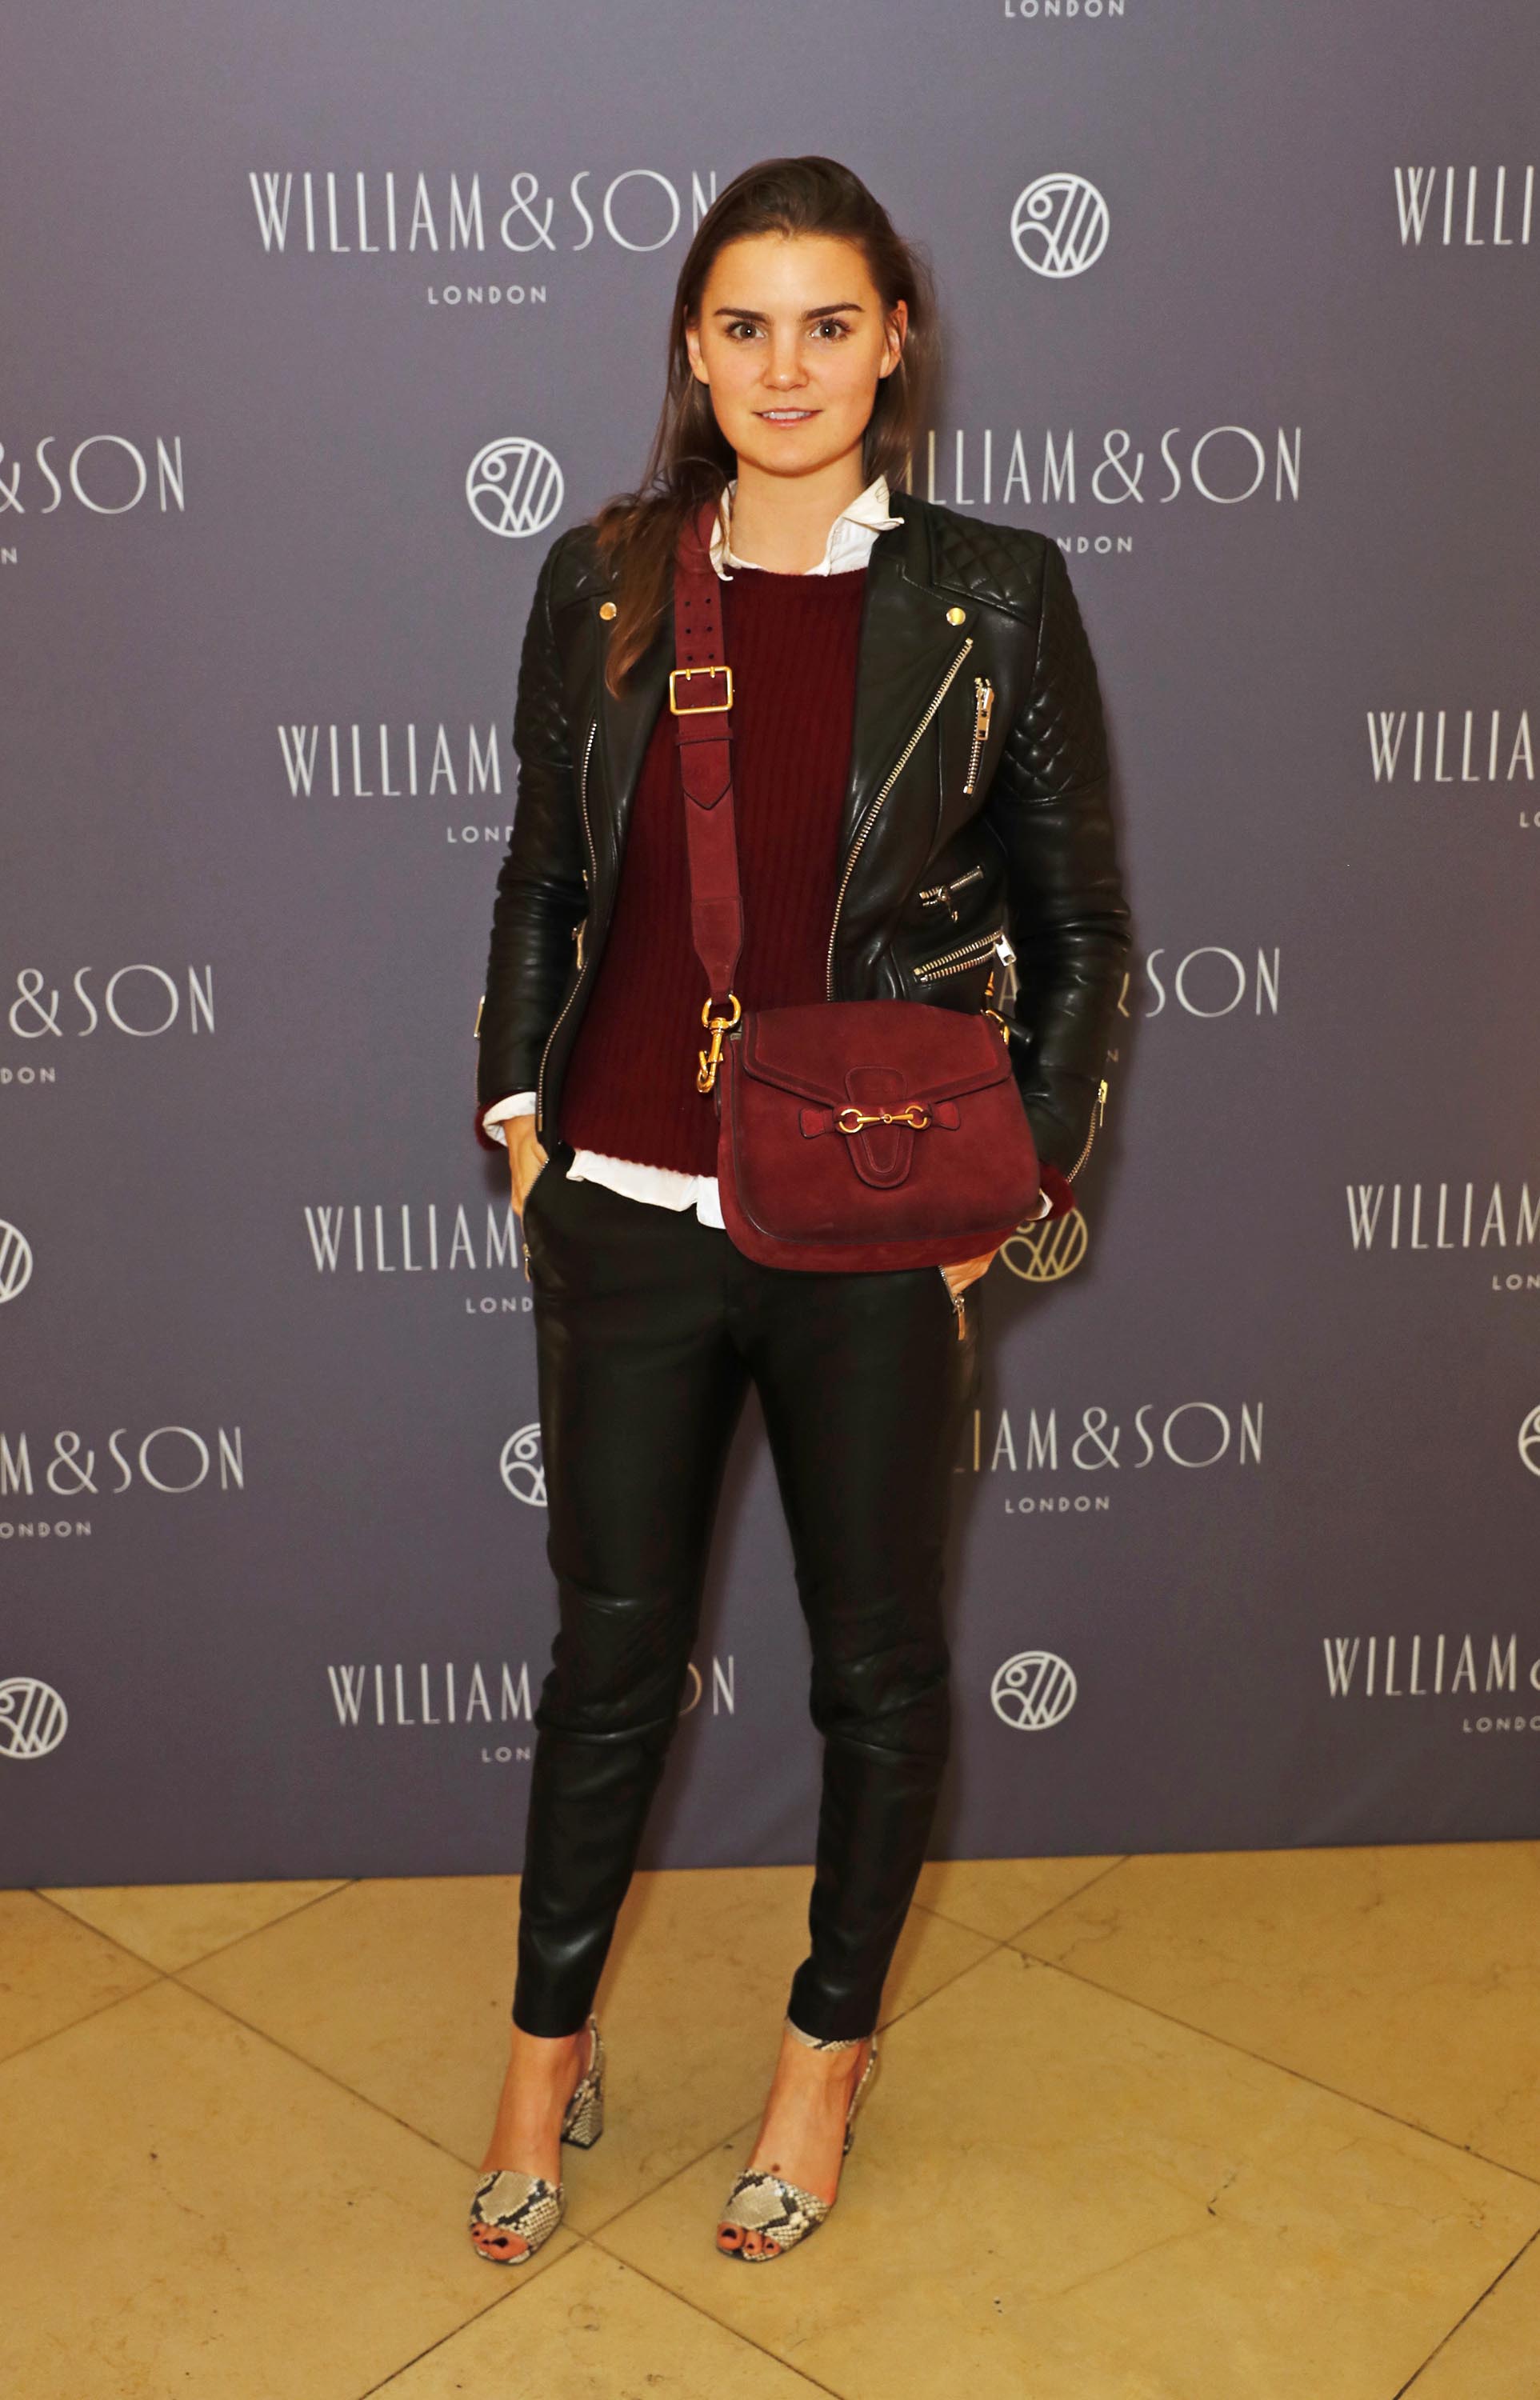 Charlotte Rey attends the William & Son Gala cocktail party